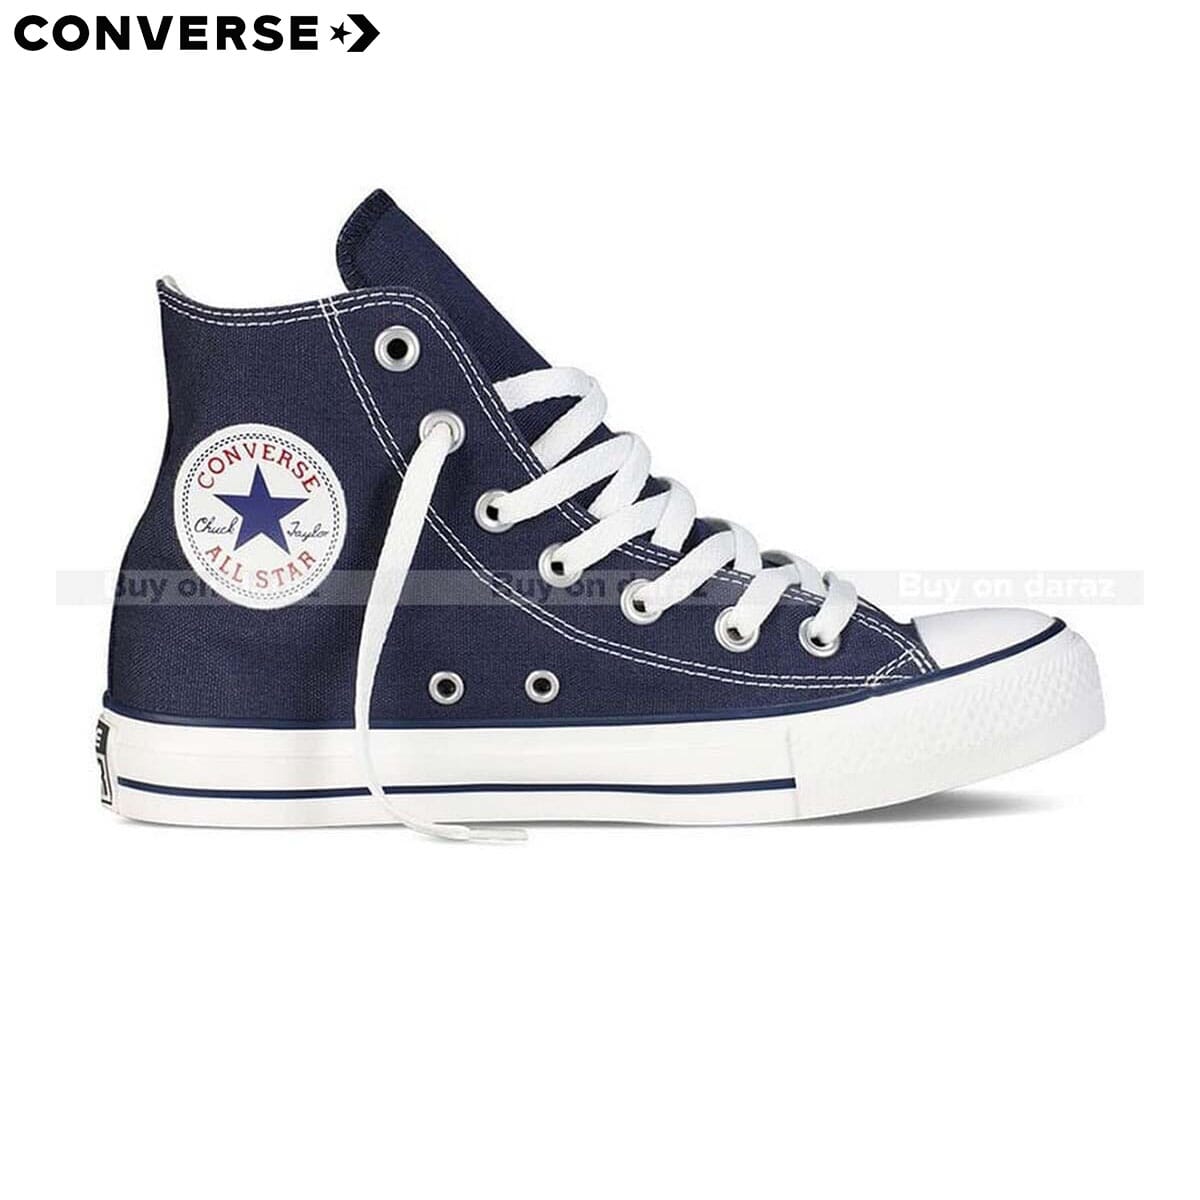 Buy Converse Shoes at Best Prices 